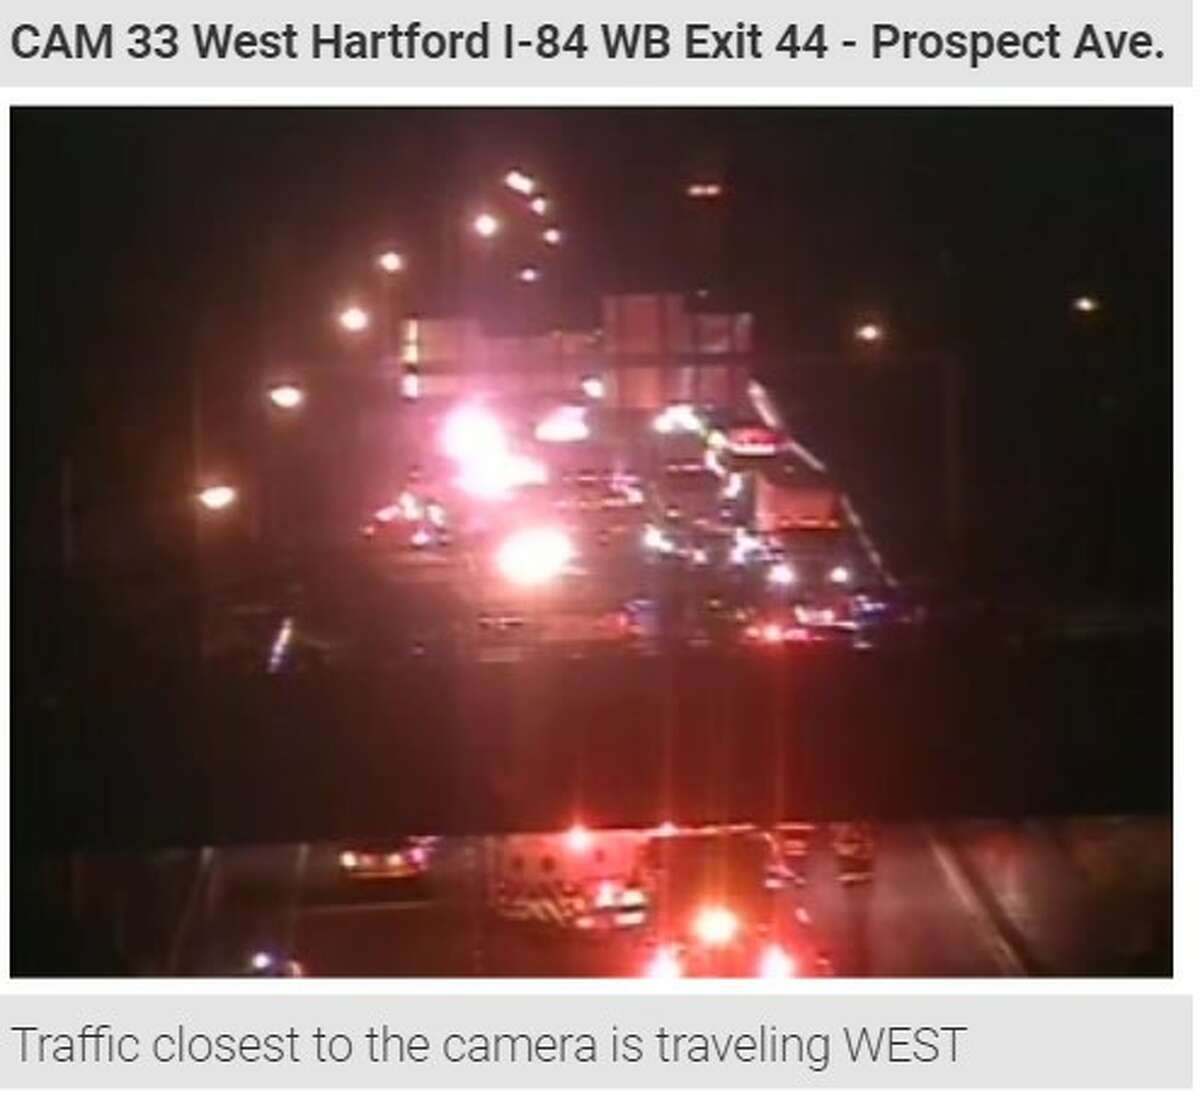 A section of I-84 west in West Hartford reopened Monday afternoon, following a multi-vehicle crash early that morning, the Department of Transportation said.